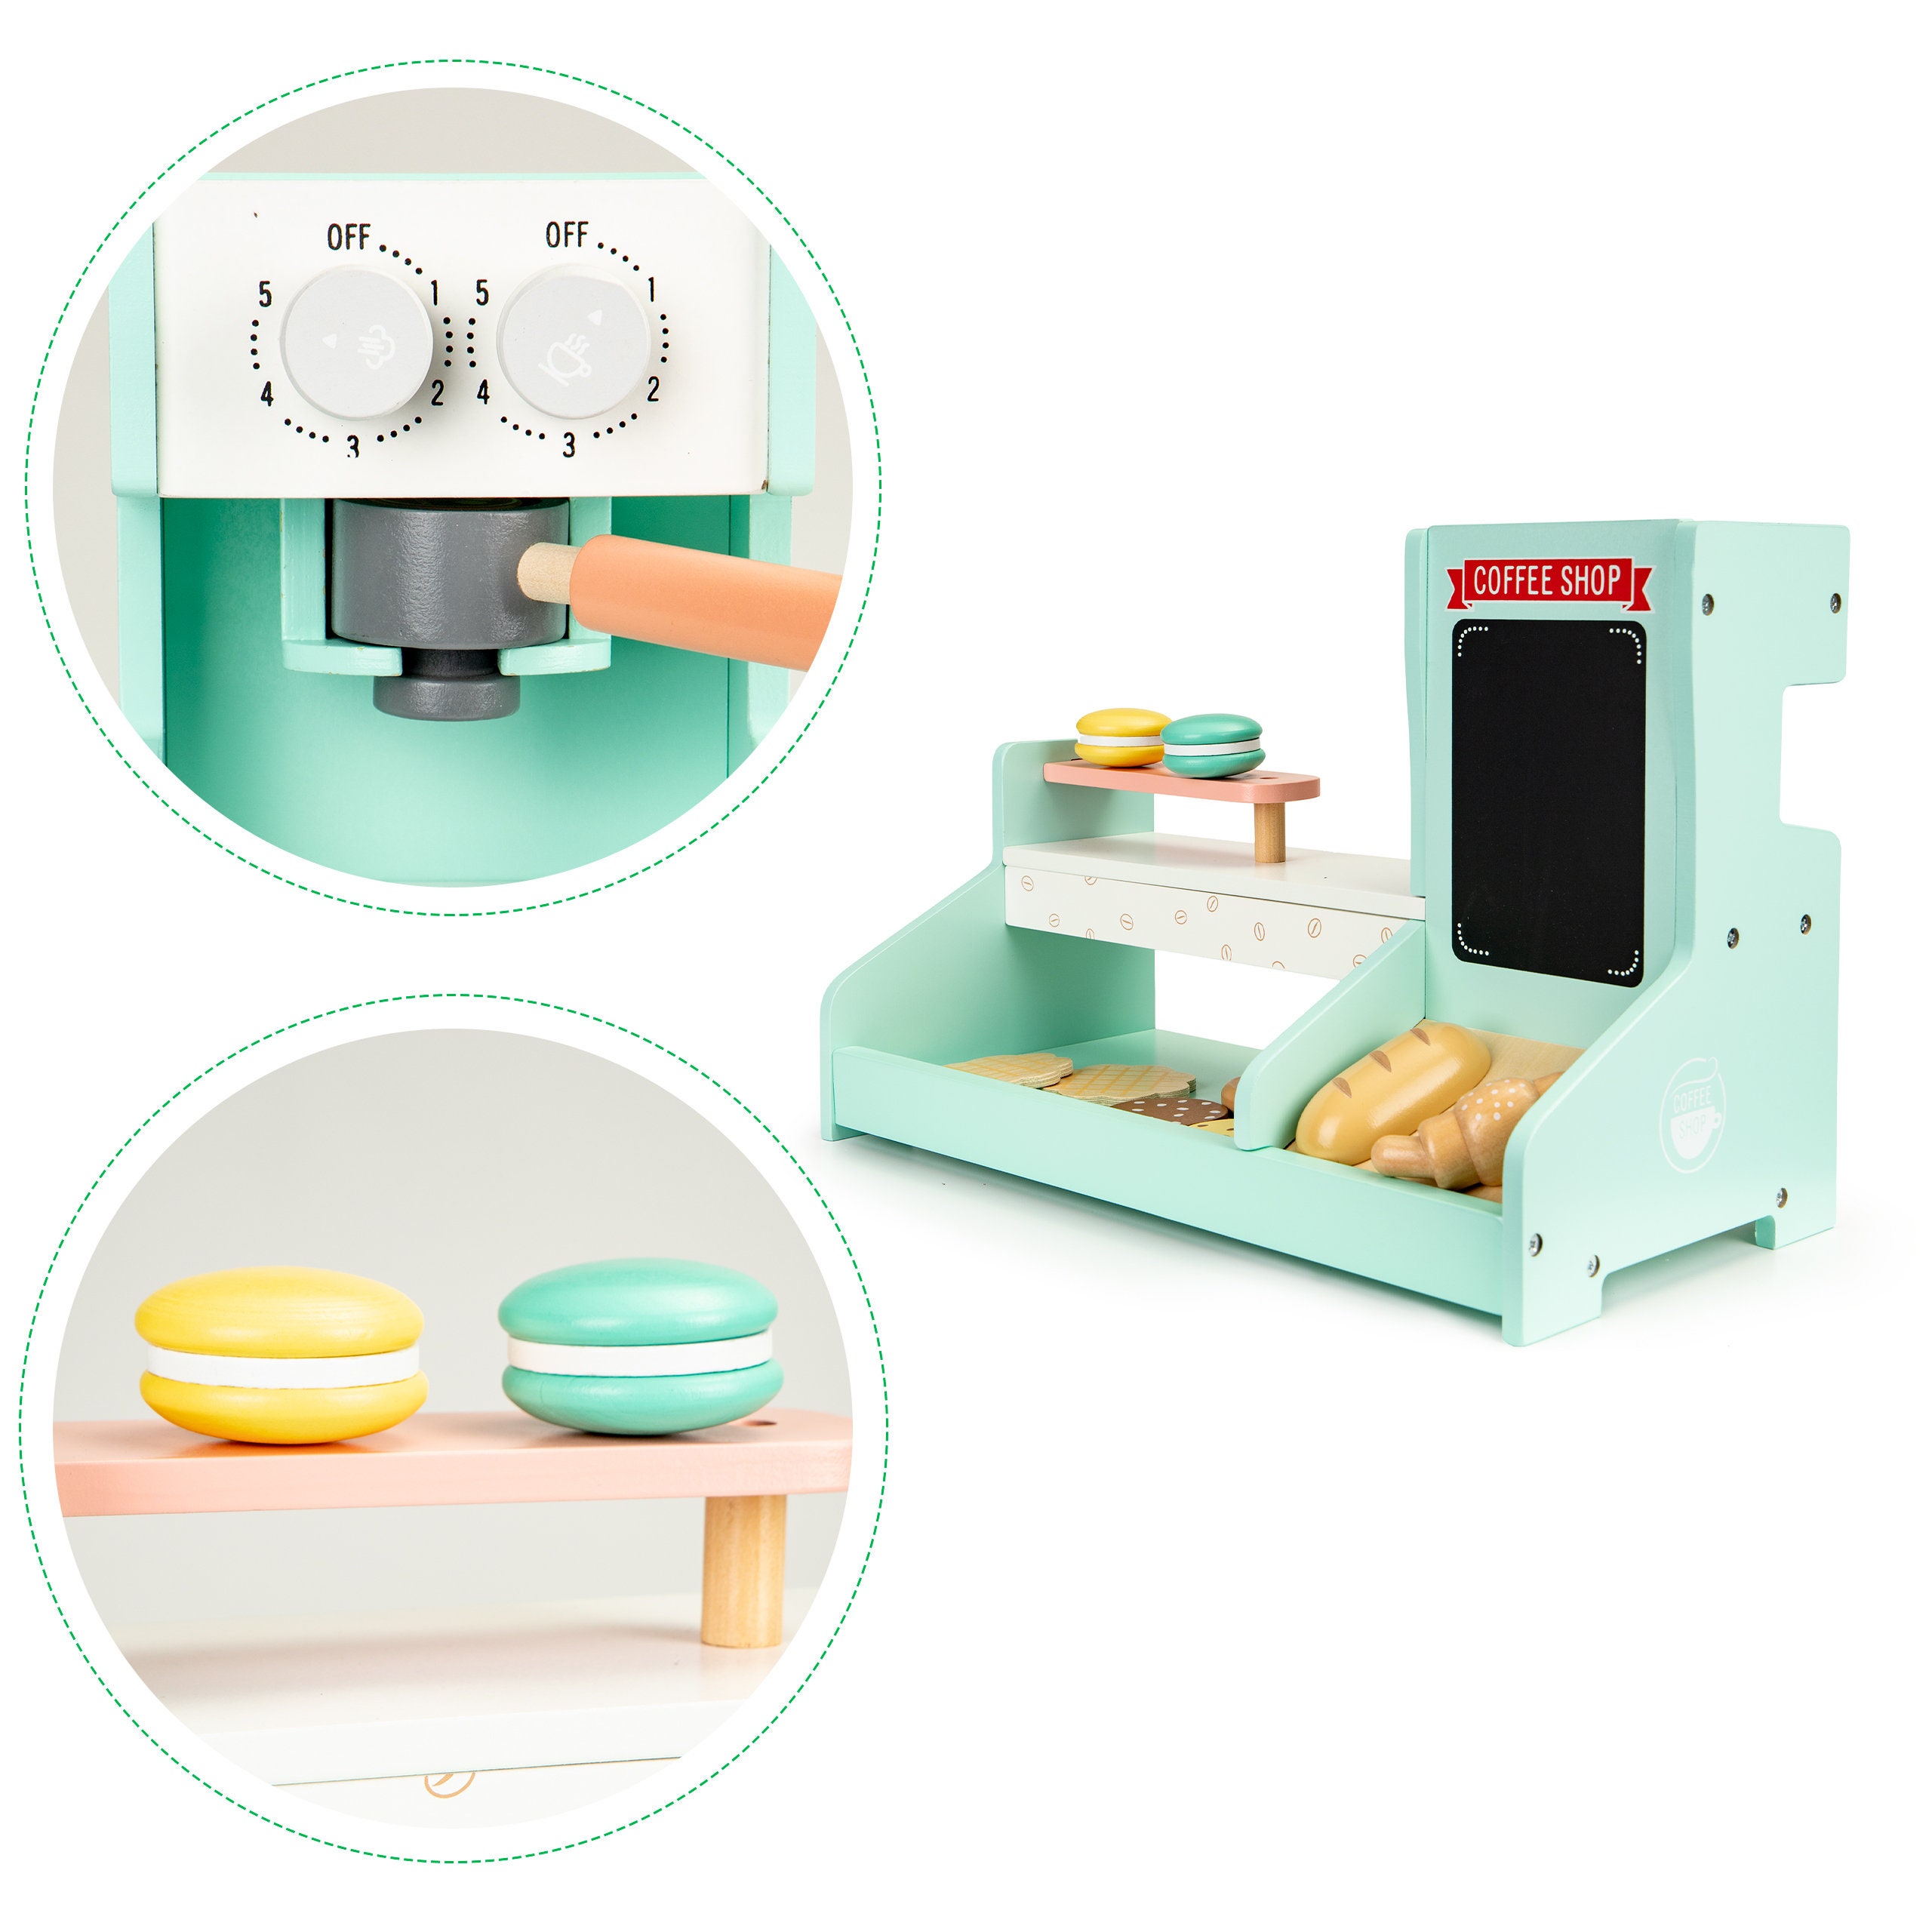 2-in-1 Wooden Coffee Sales Desk Playset, Coffee Maker Set - 24 PCS Bread,  Desserts, Coffee Making Store,Stand Toddler Play Wooden Food Toys